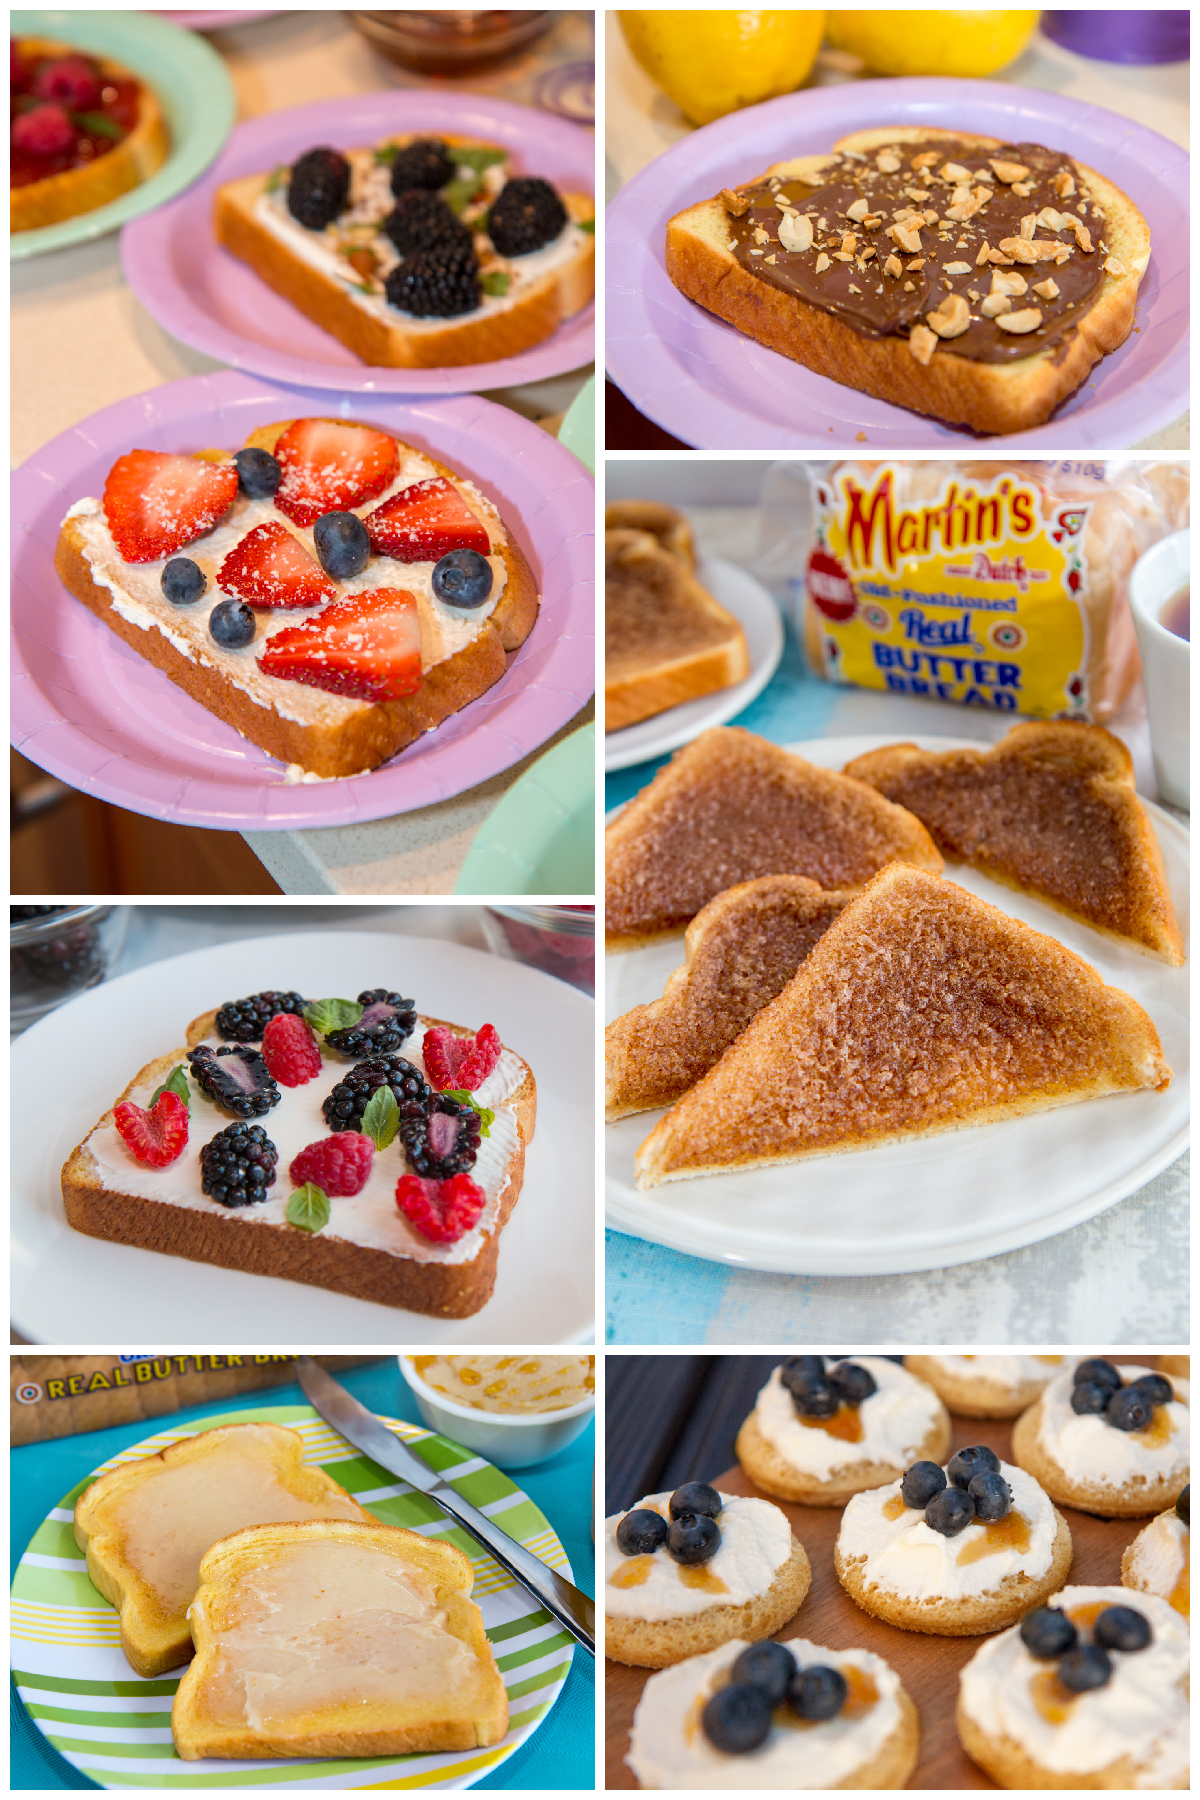 Mother's Day Build-Your-Own Toast Bar | Sweet Toast Toppings: Berry & Greek Yogurt Toast; Nutella & Peanut Toast; Cinnamon Toast, Berry & Basil Cream Cheese Toast; Honey Butter Toast; Ricotta & Honey Toast; and many more!